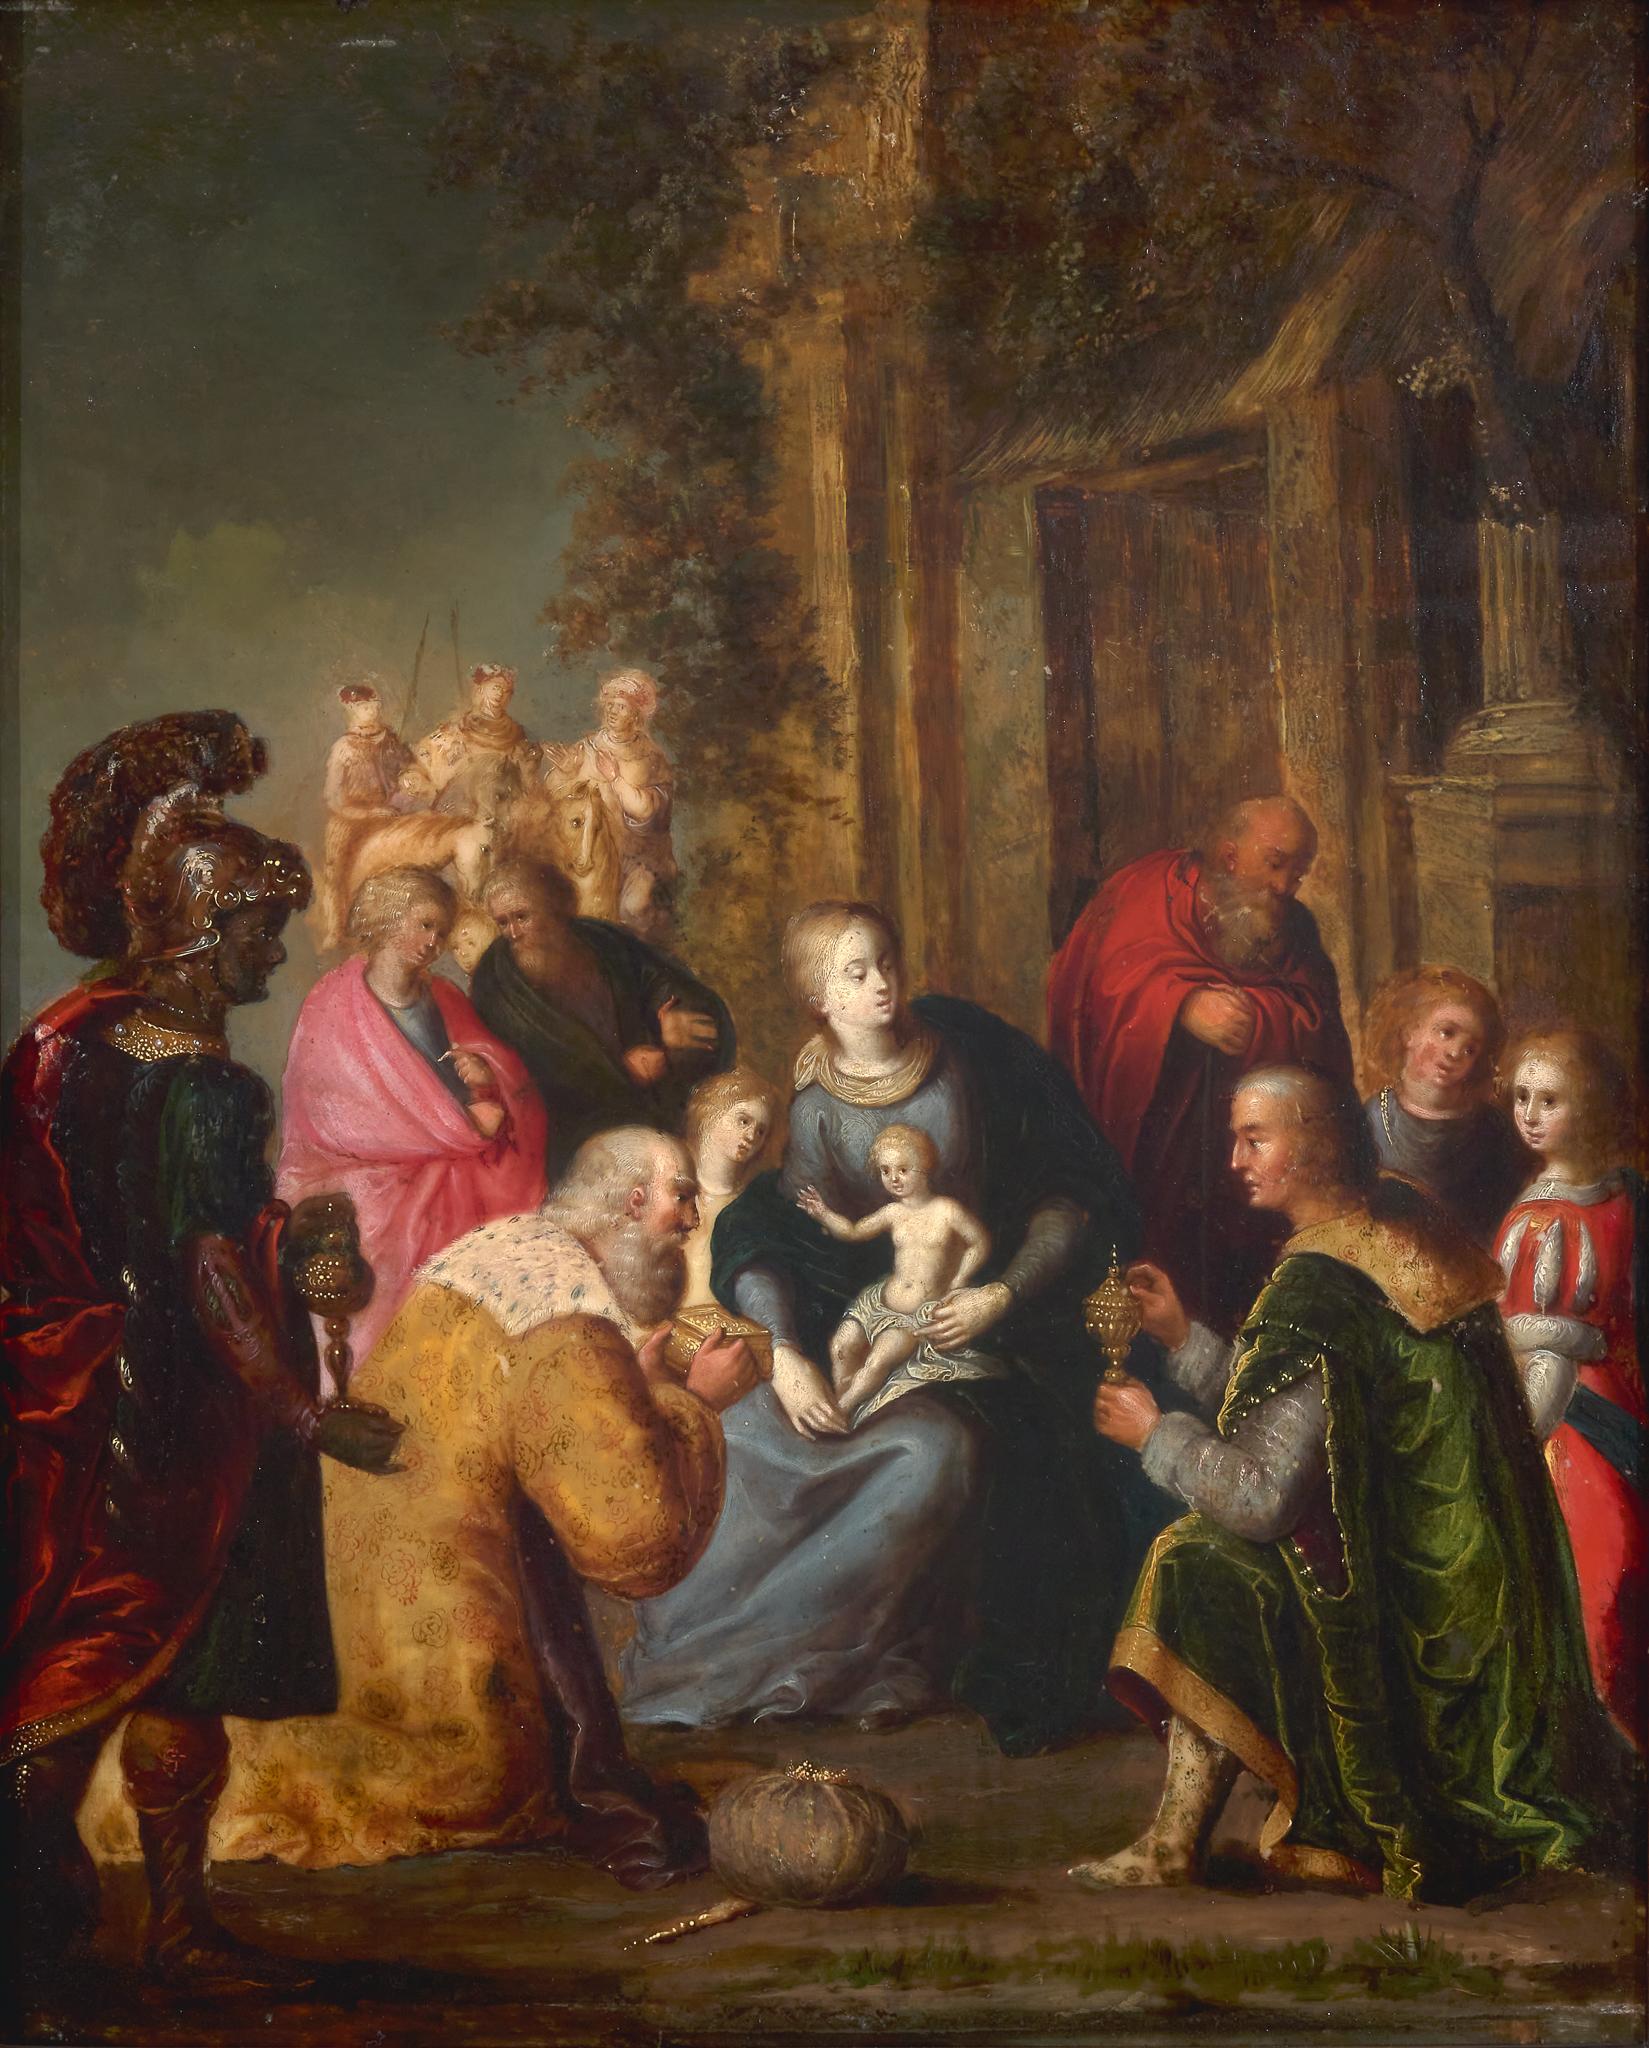 Louis de Caullery Figurative Painting - Adoration of the Magi - Oil on marble with gilt decorations - Flemish old master